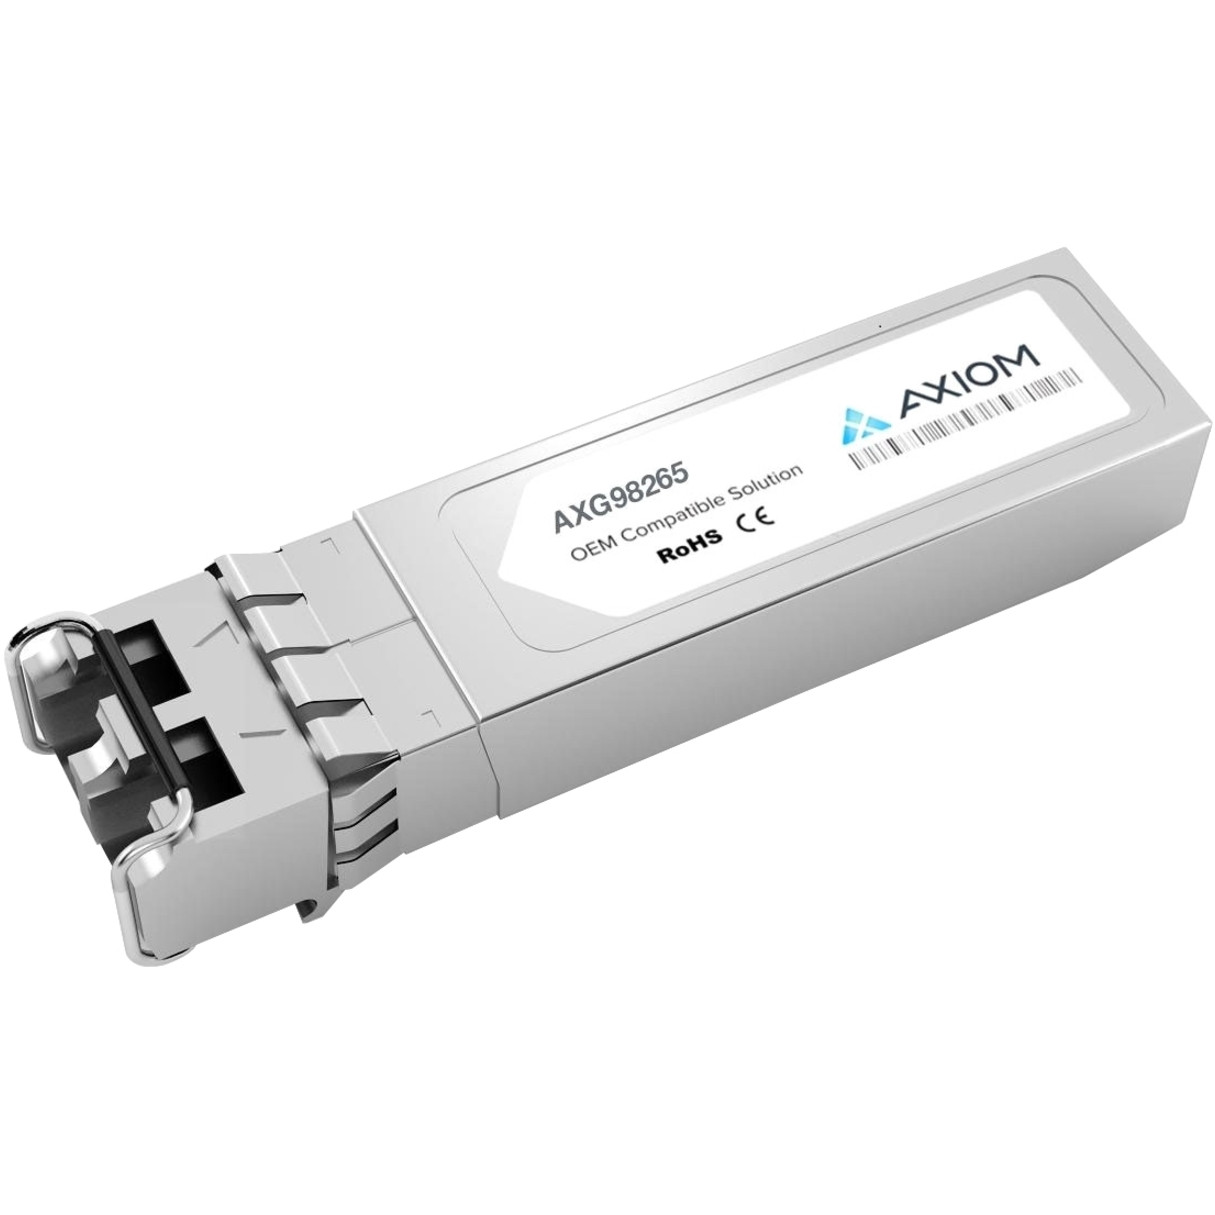 Axiom Memory Solutions 16GBASE-SW SFP+ Transceiver for Avago AFBR-57F5MZTAA Compliant100% Avago Compatible 16GBASE-SW SFP+ AXG98265